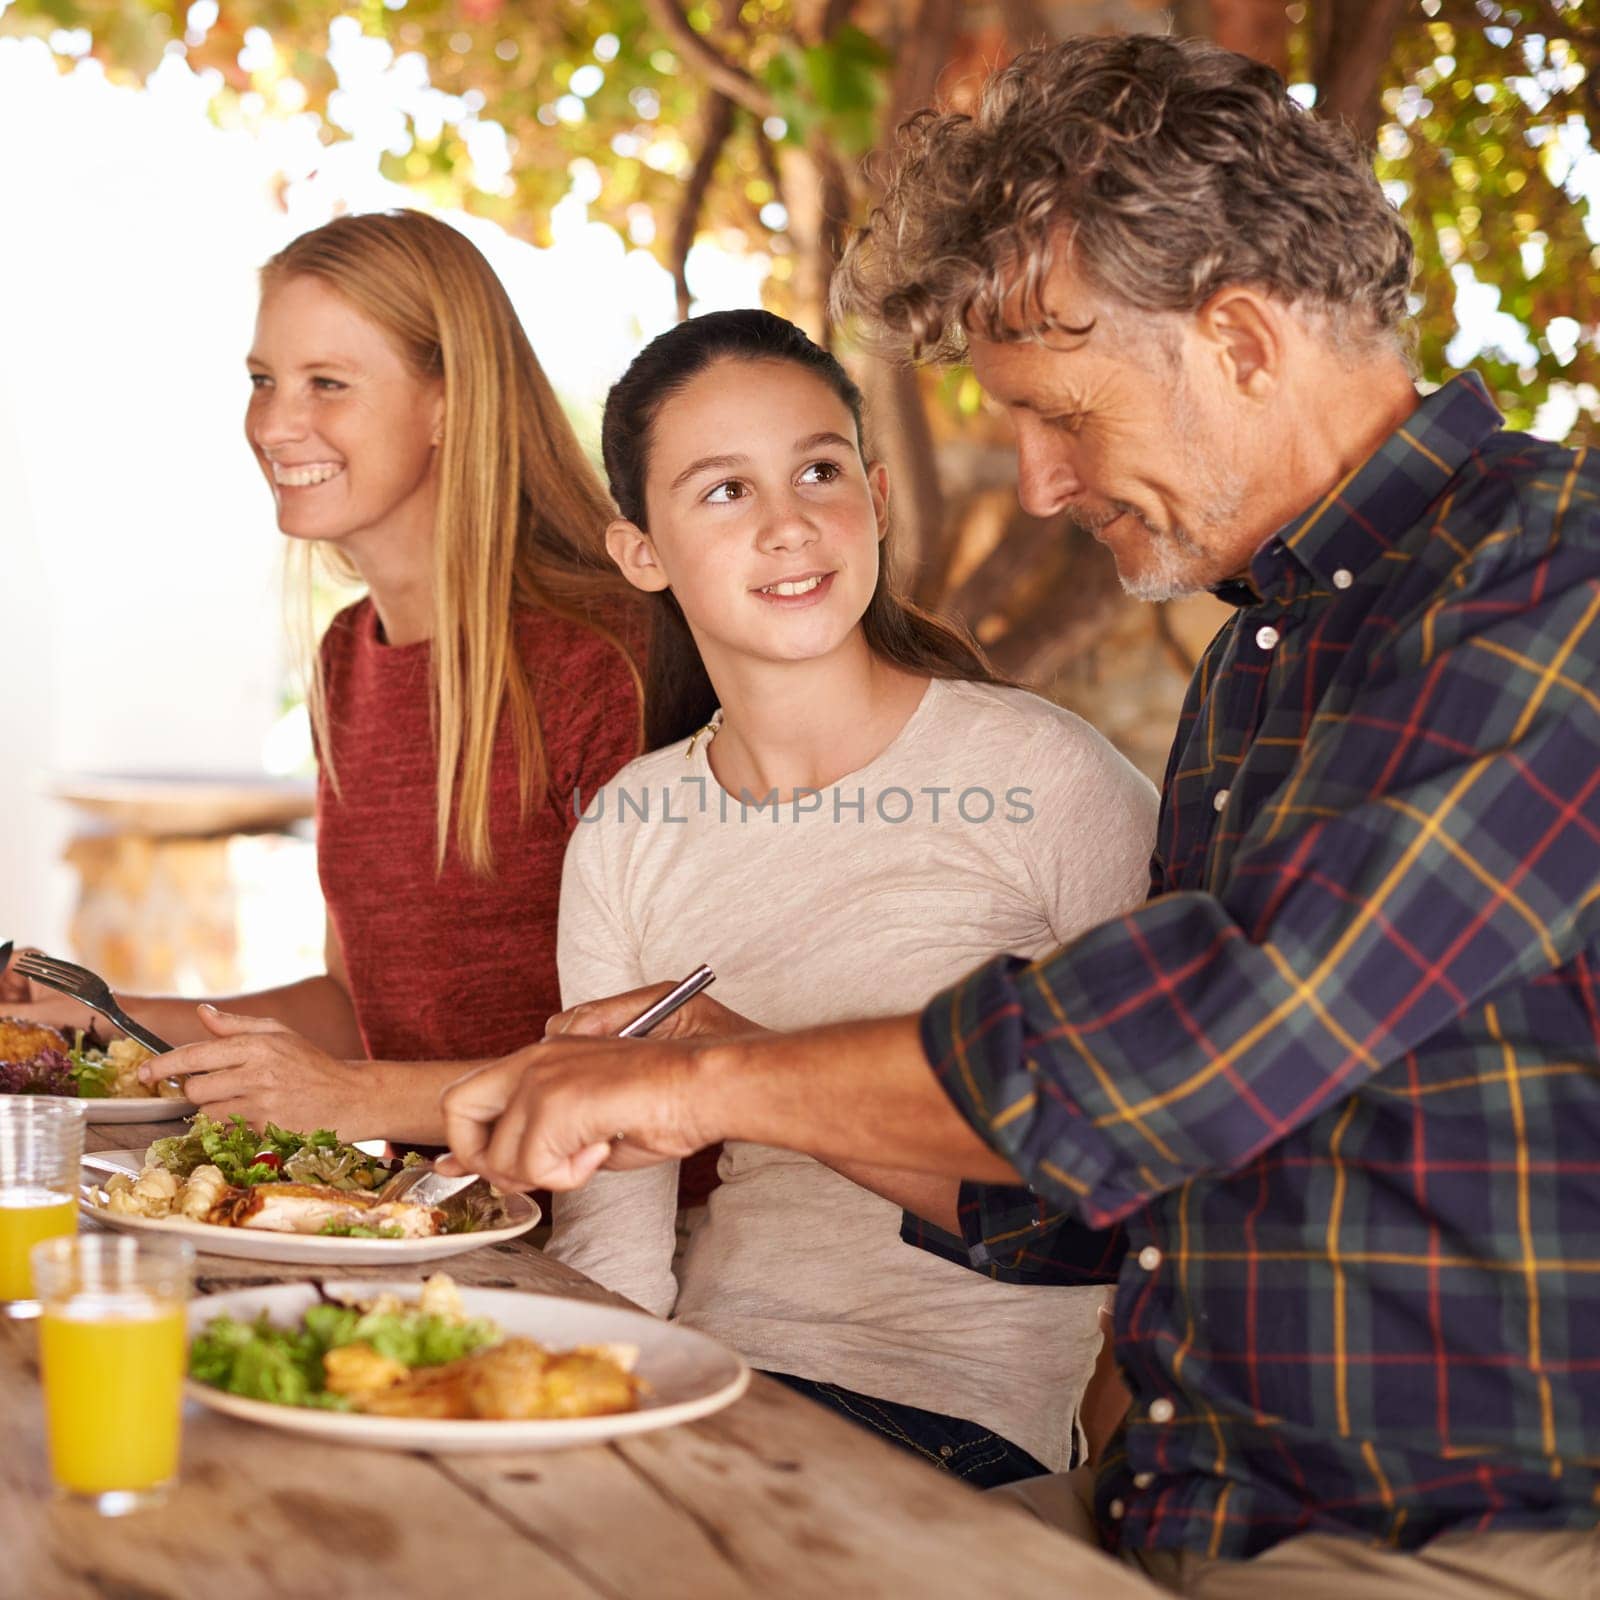 Family, outdoor and lunch with celebration, happiness and smile with social gathering and bonding together. Parents, group and mother with father and daughter with food and healthy meal with sunshine.